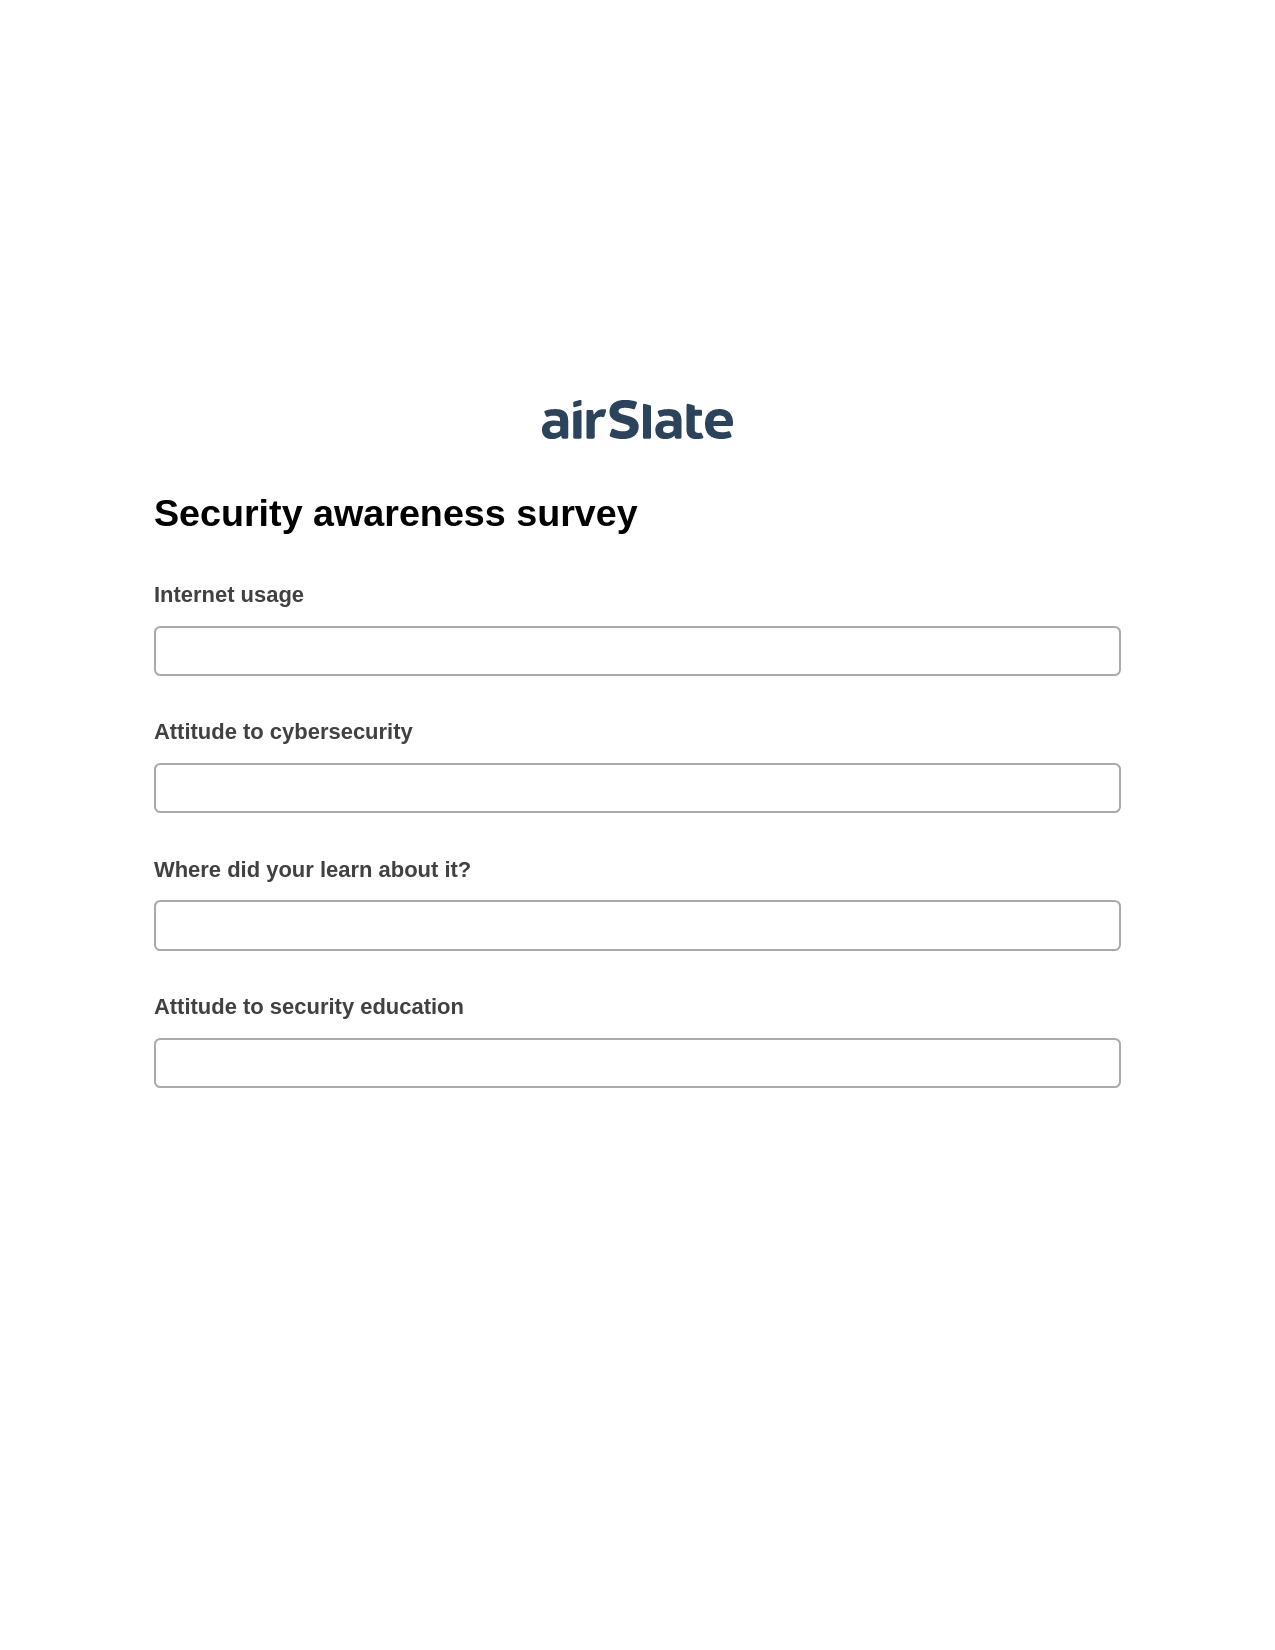 Multirole Security awareness survey Pre-fill from MS Dynamics 365 Records DEPRECATED, Mailchimp add recipient to audience Bot, Archive to SharePoint Folder Bot